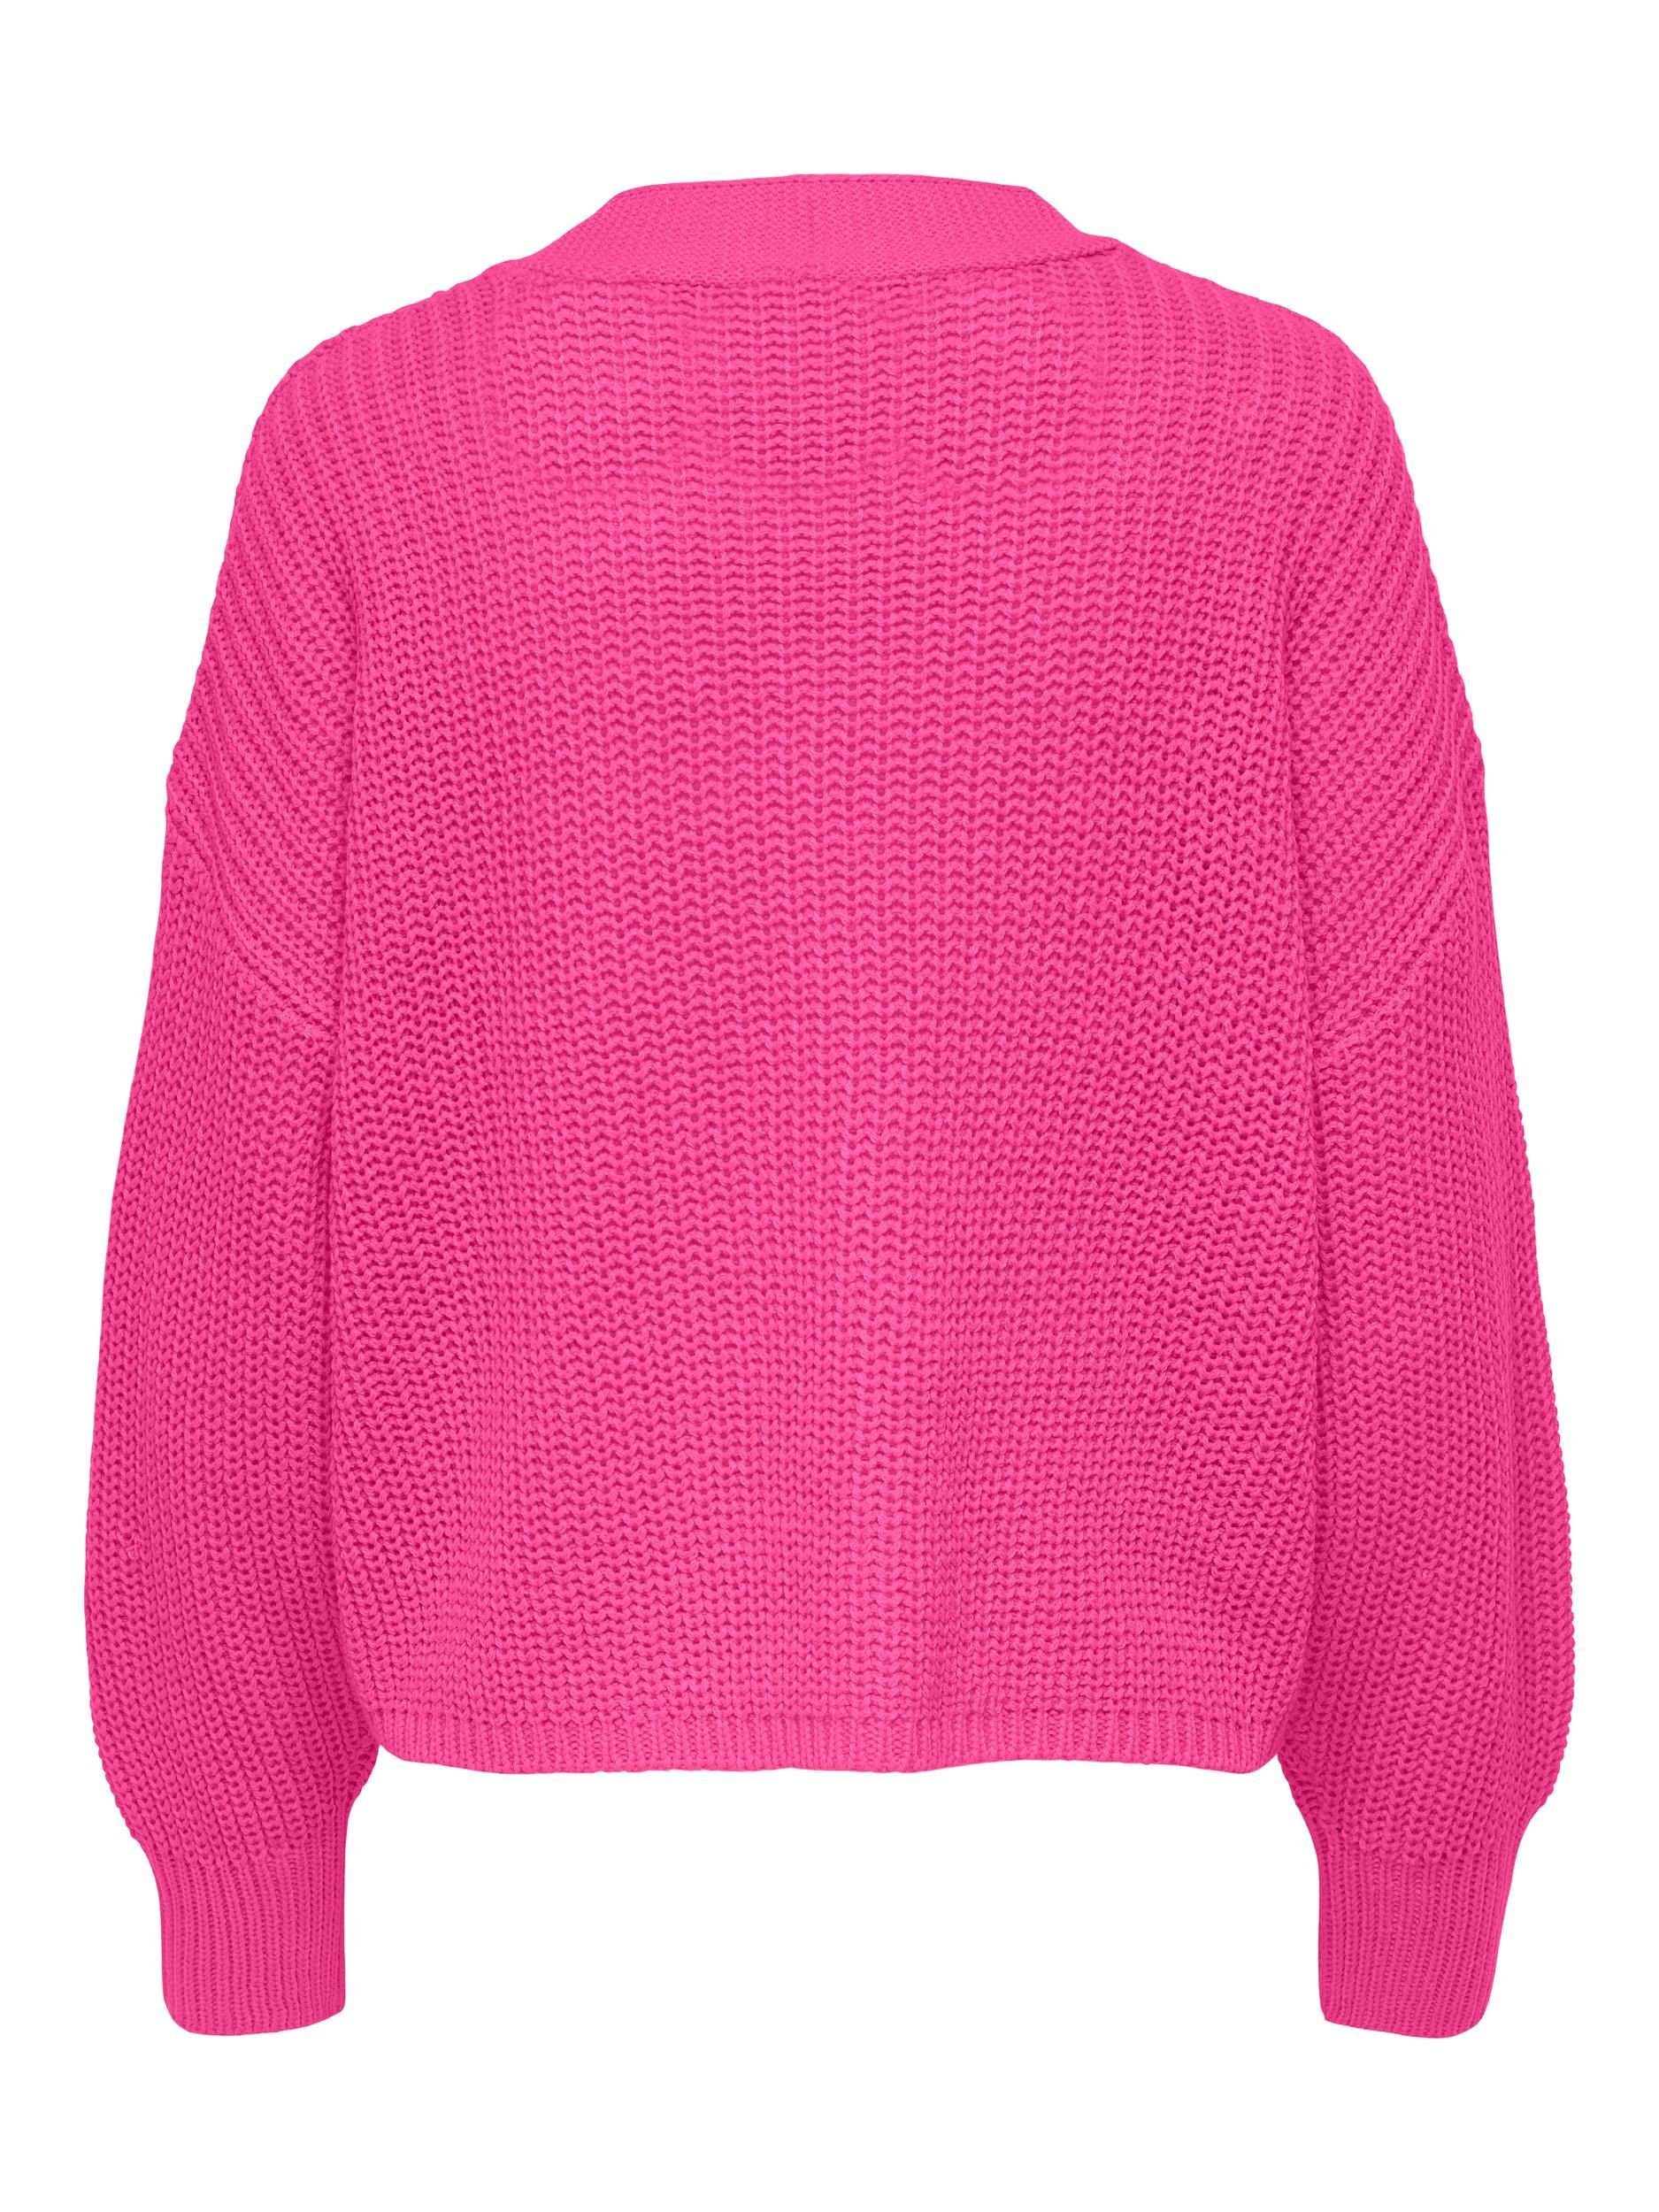 ONLY Strickpullover Raspberry